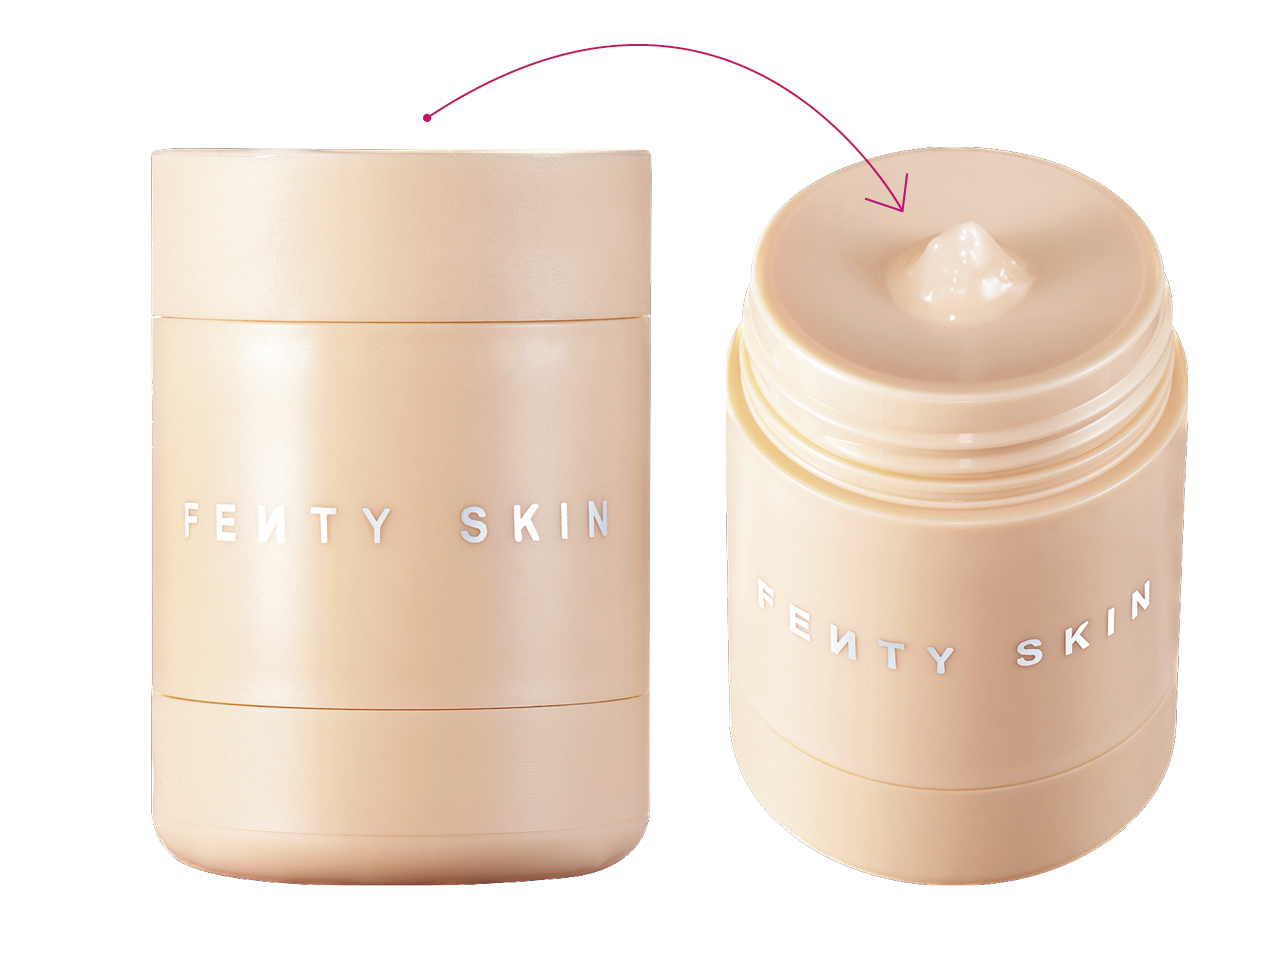 A beige jar of Fenty Skin Plush Puddin’ Intensive Recovery Lip Mask lip balm, shown with an arrow pointing to the twist-up packaging.